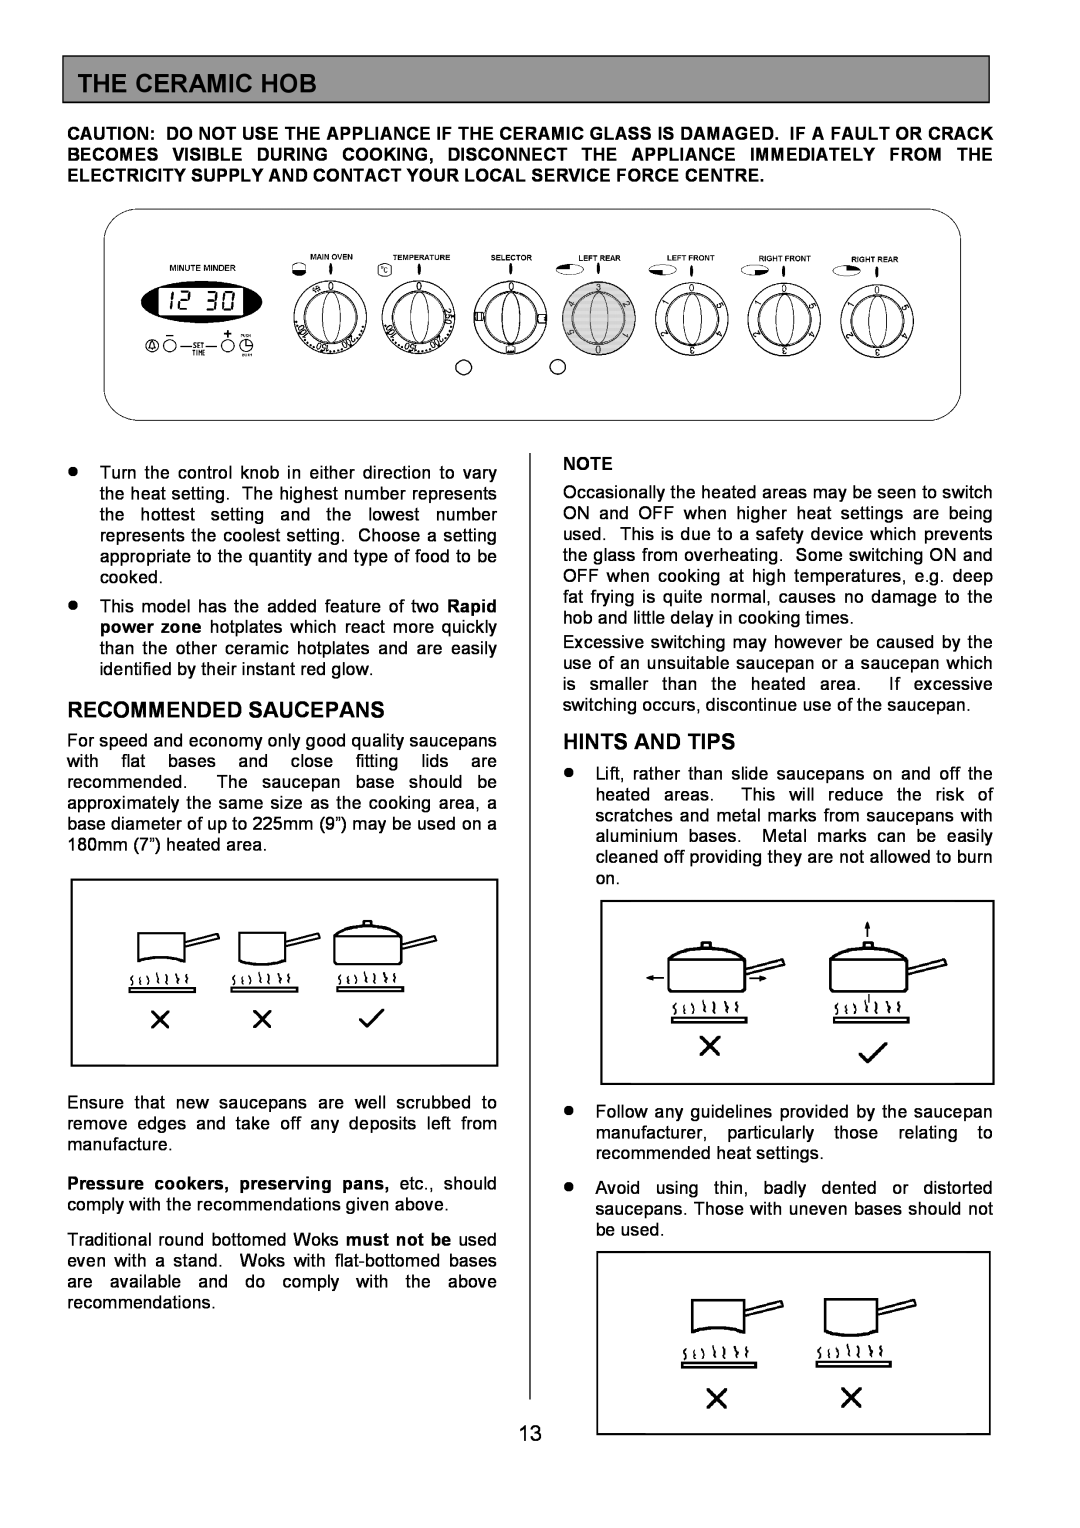 Tricity Bendix SIE424 installation instructions The Ceramic Hob, Recommended Saucepans, Hints And Tips 